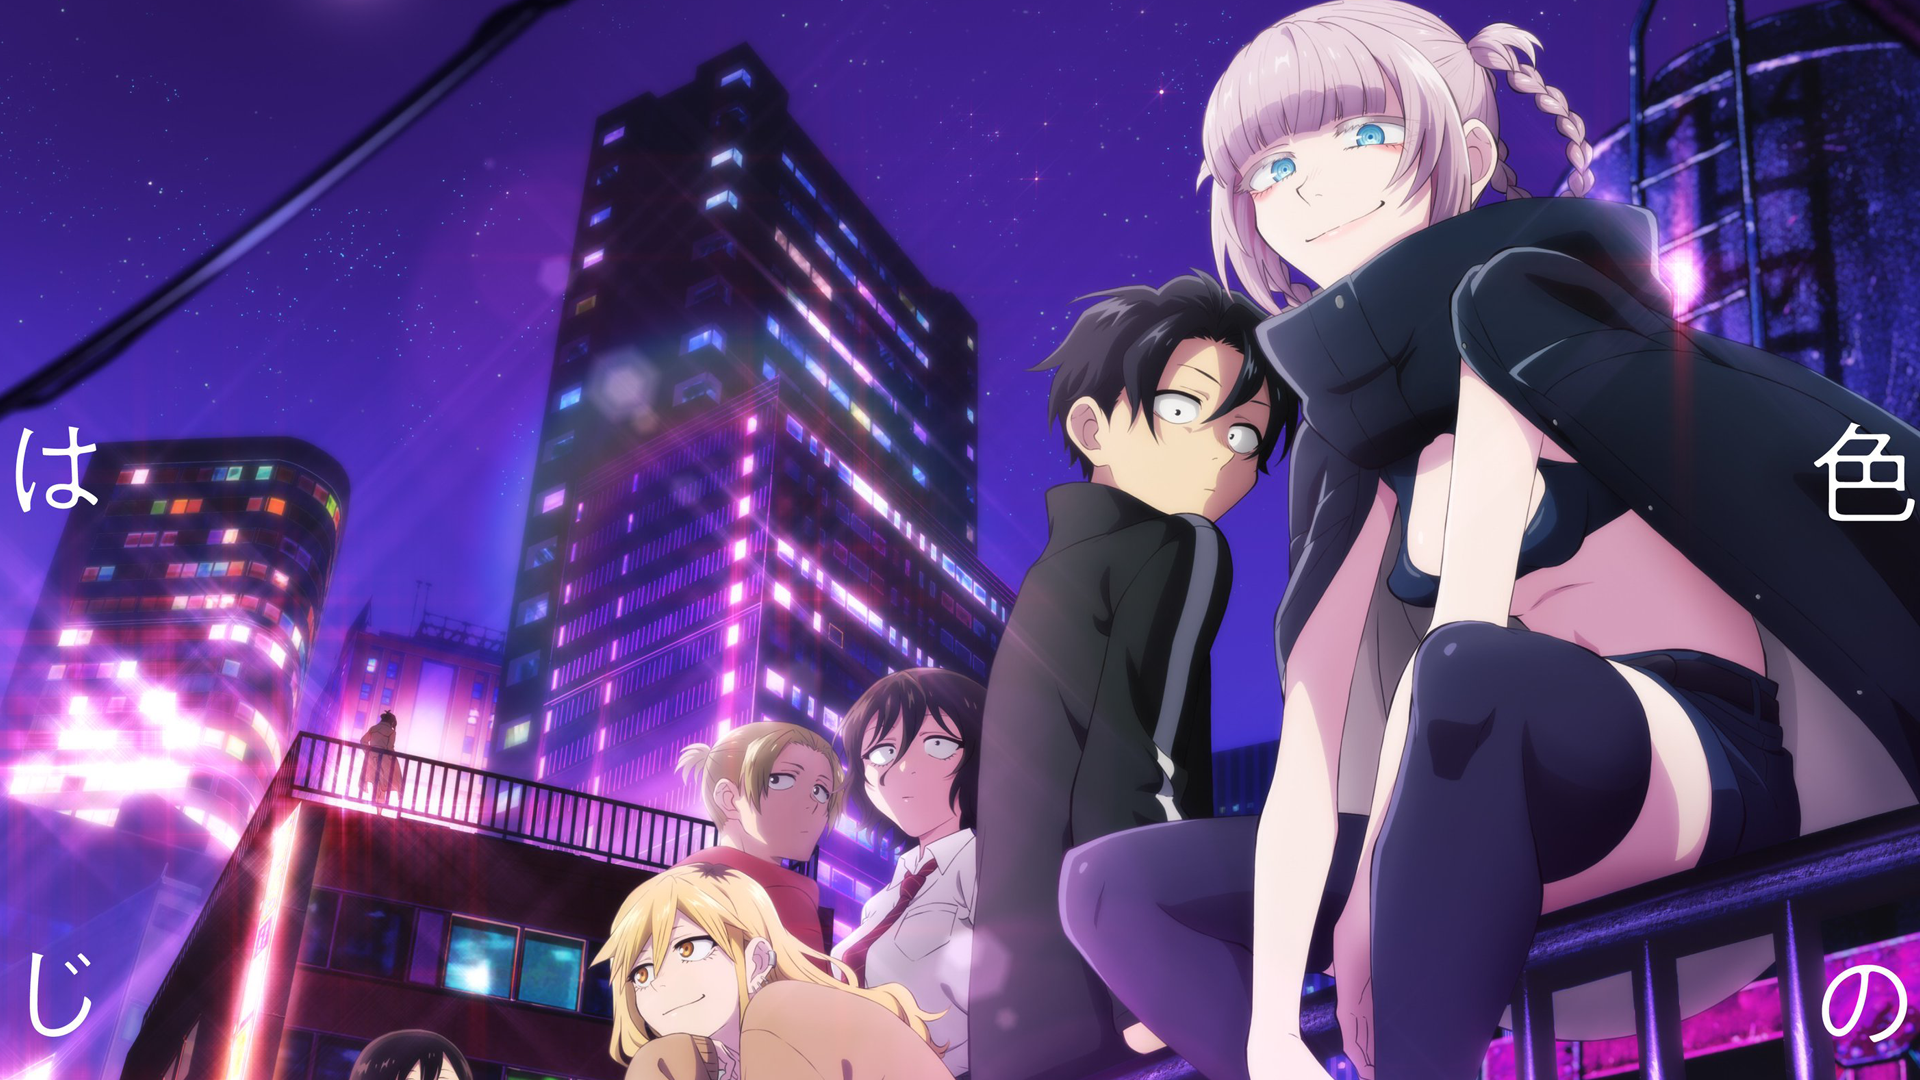 Call of the Night Reveals New Key Visual and Additional Cast